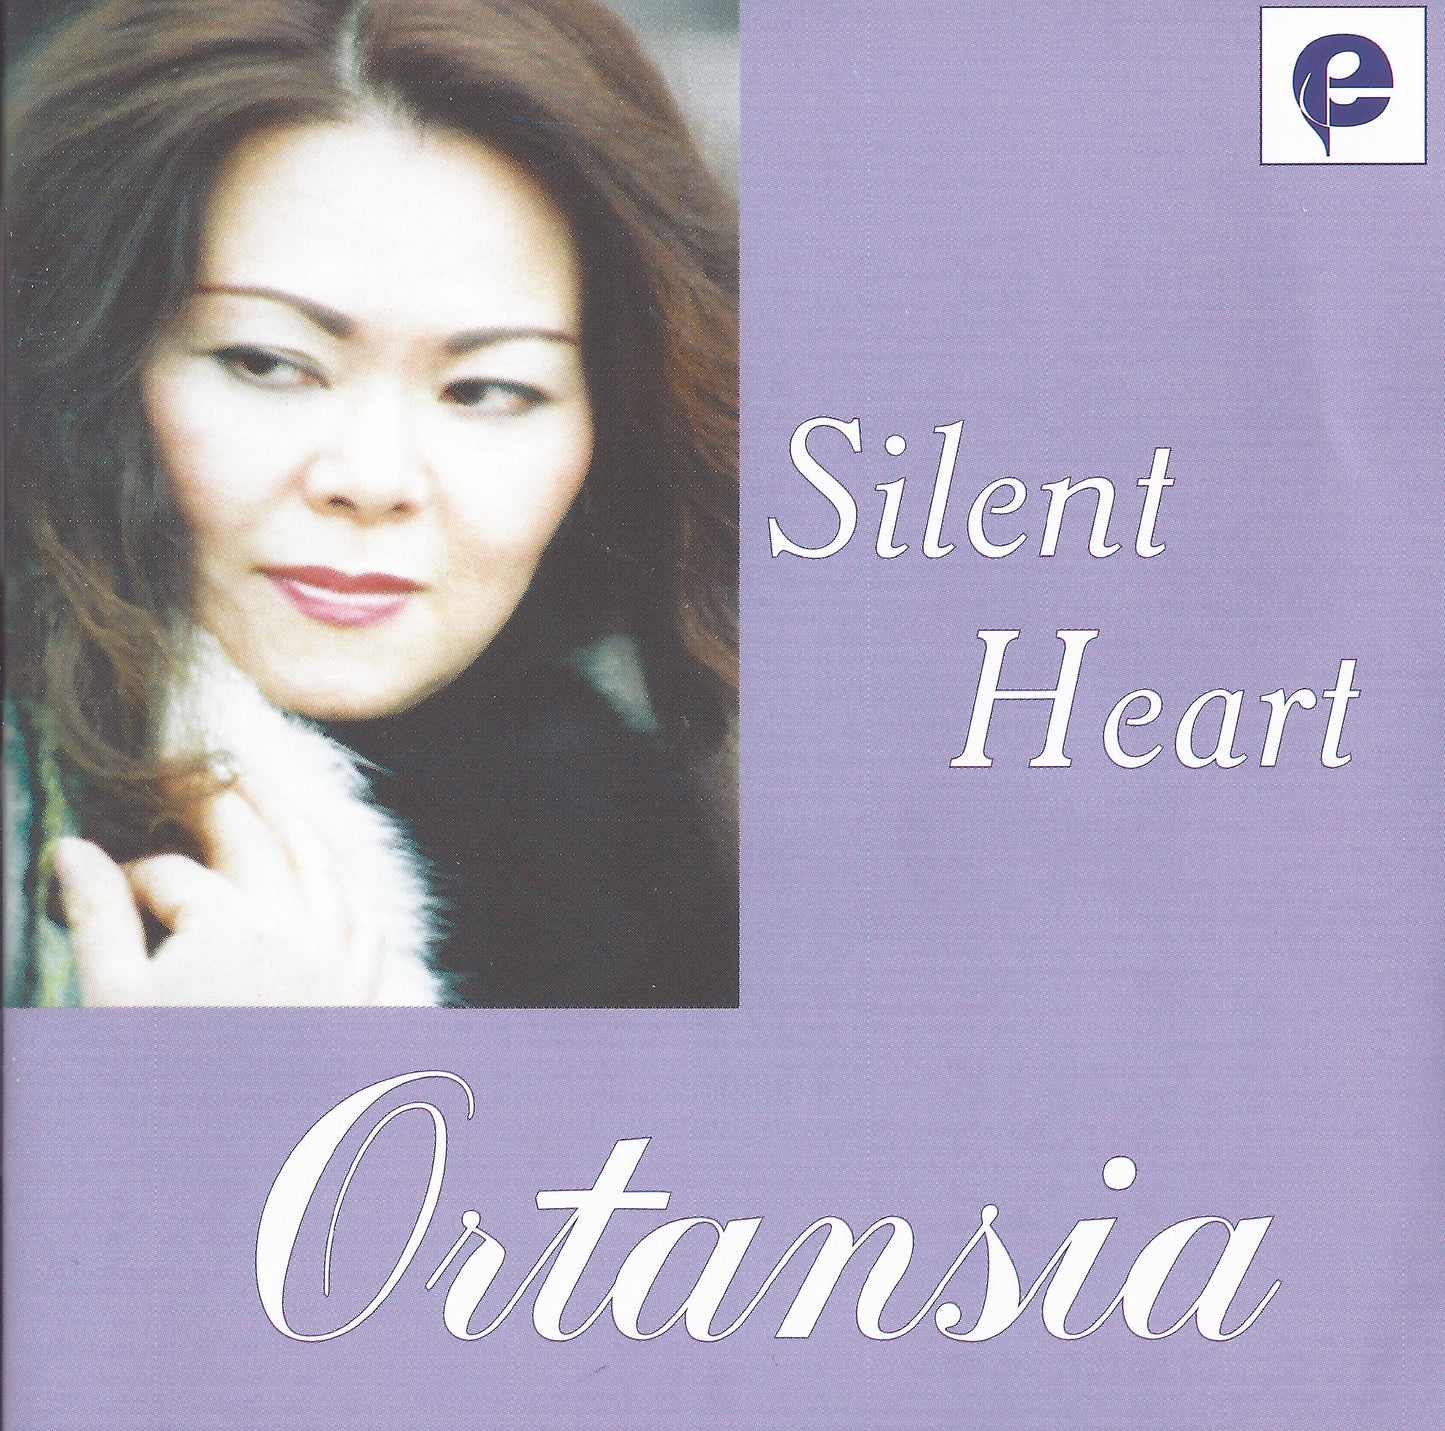 Think of Me - Ortansia